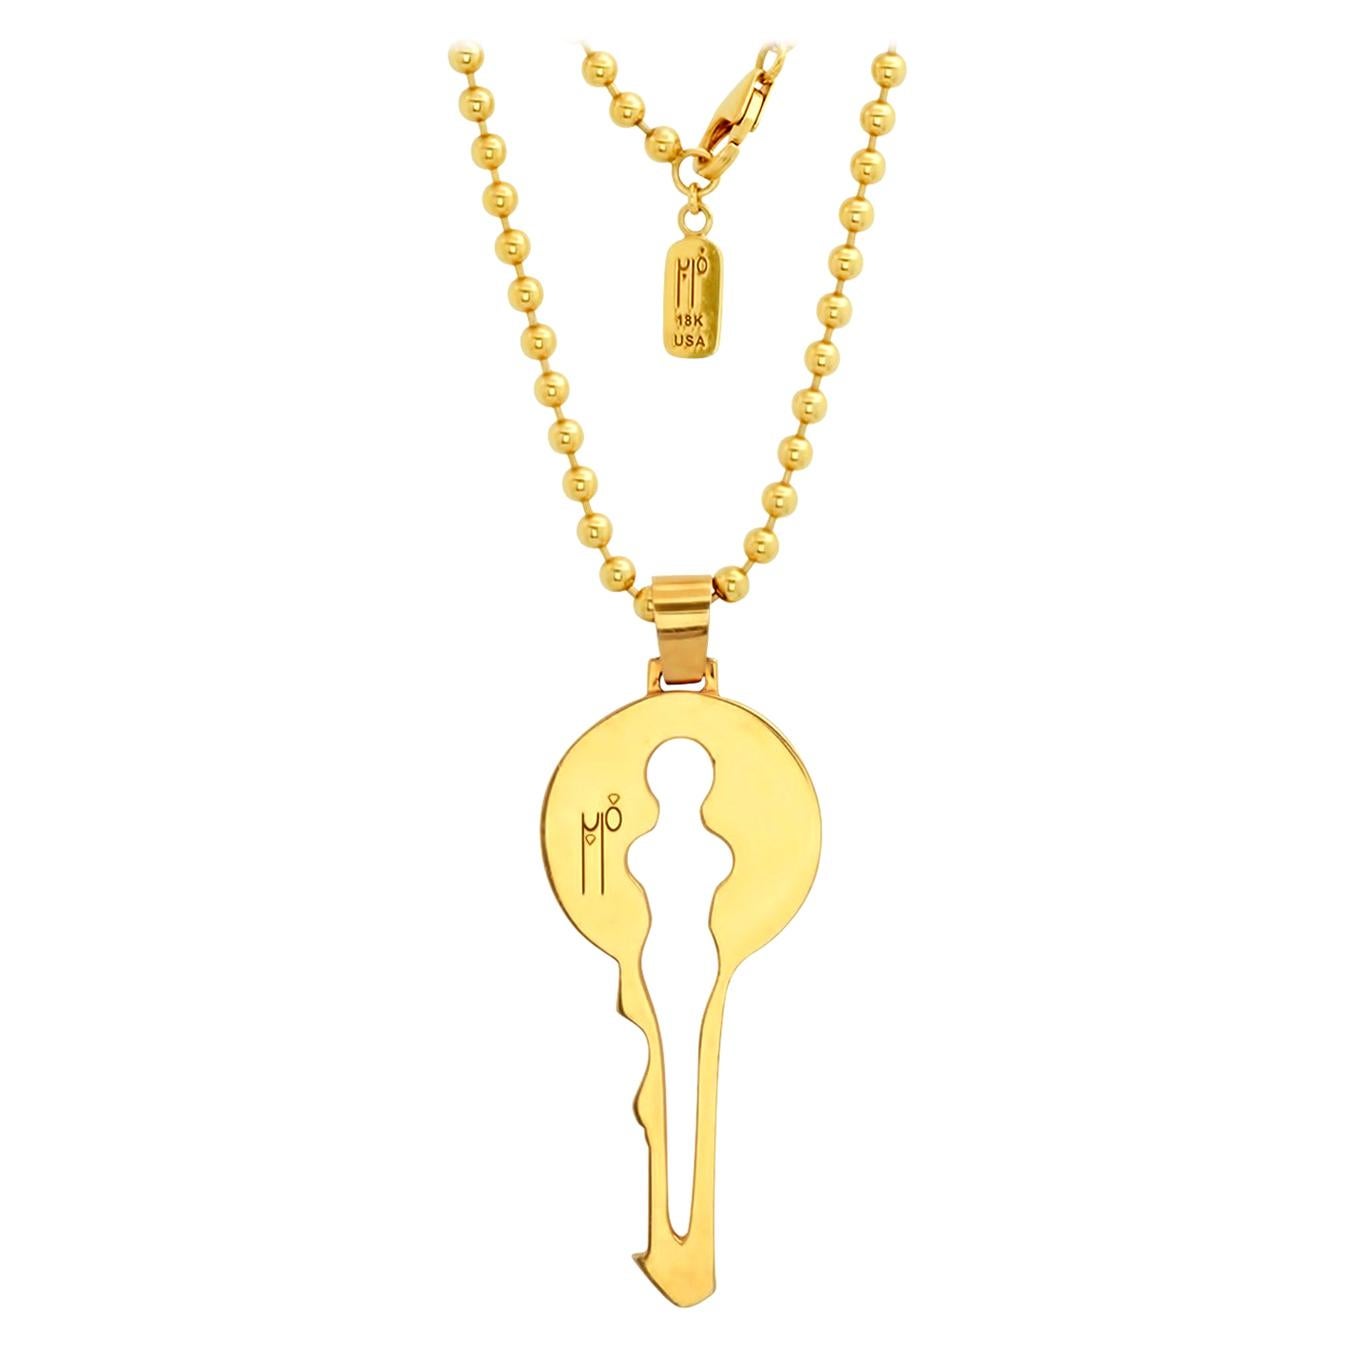 FARBOD 18 Karat Yellow Gold Pendant "Answer" For Sale